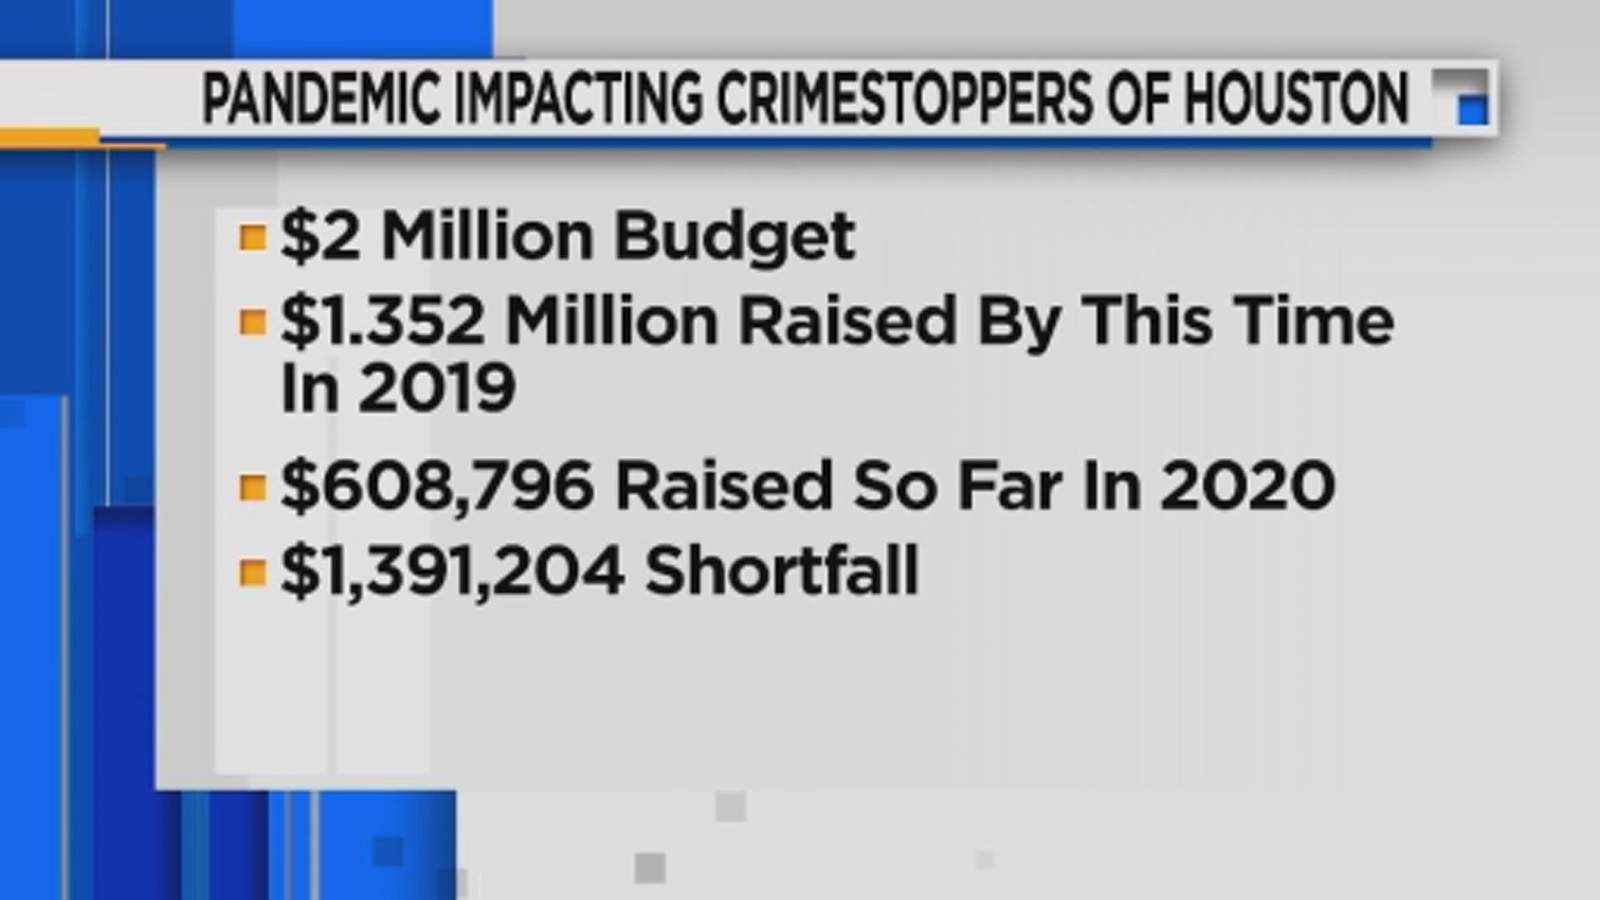 COVID-19 pandemic impacting Houston Crime Stoppers’ fundraising goals